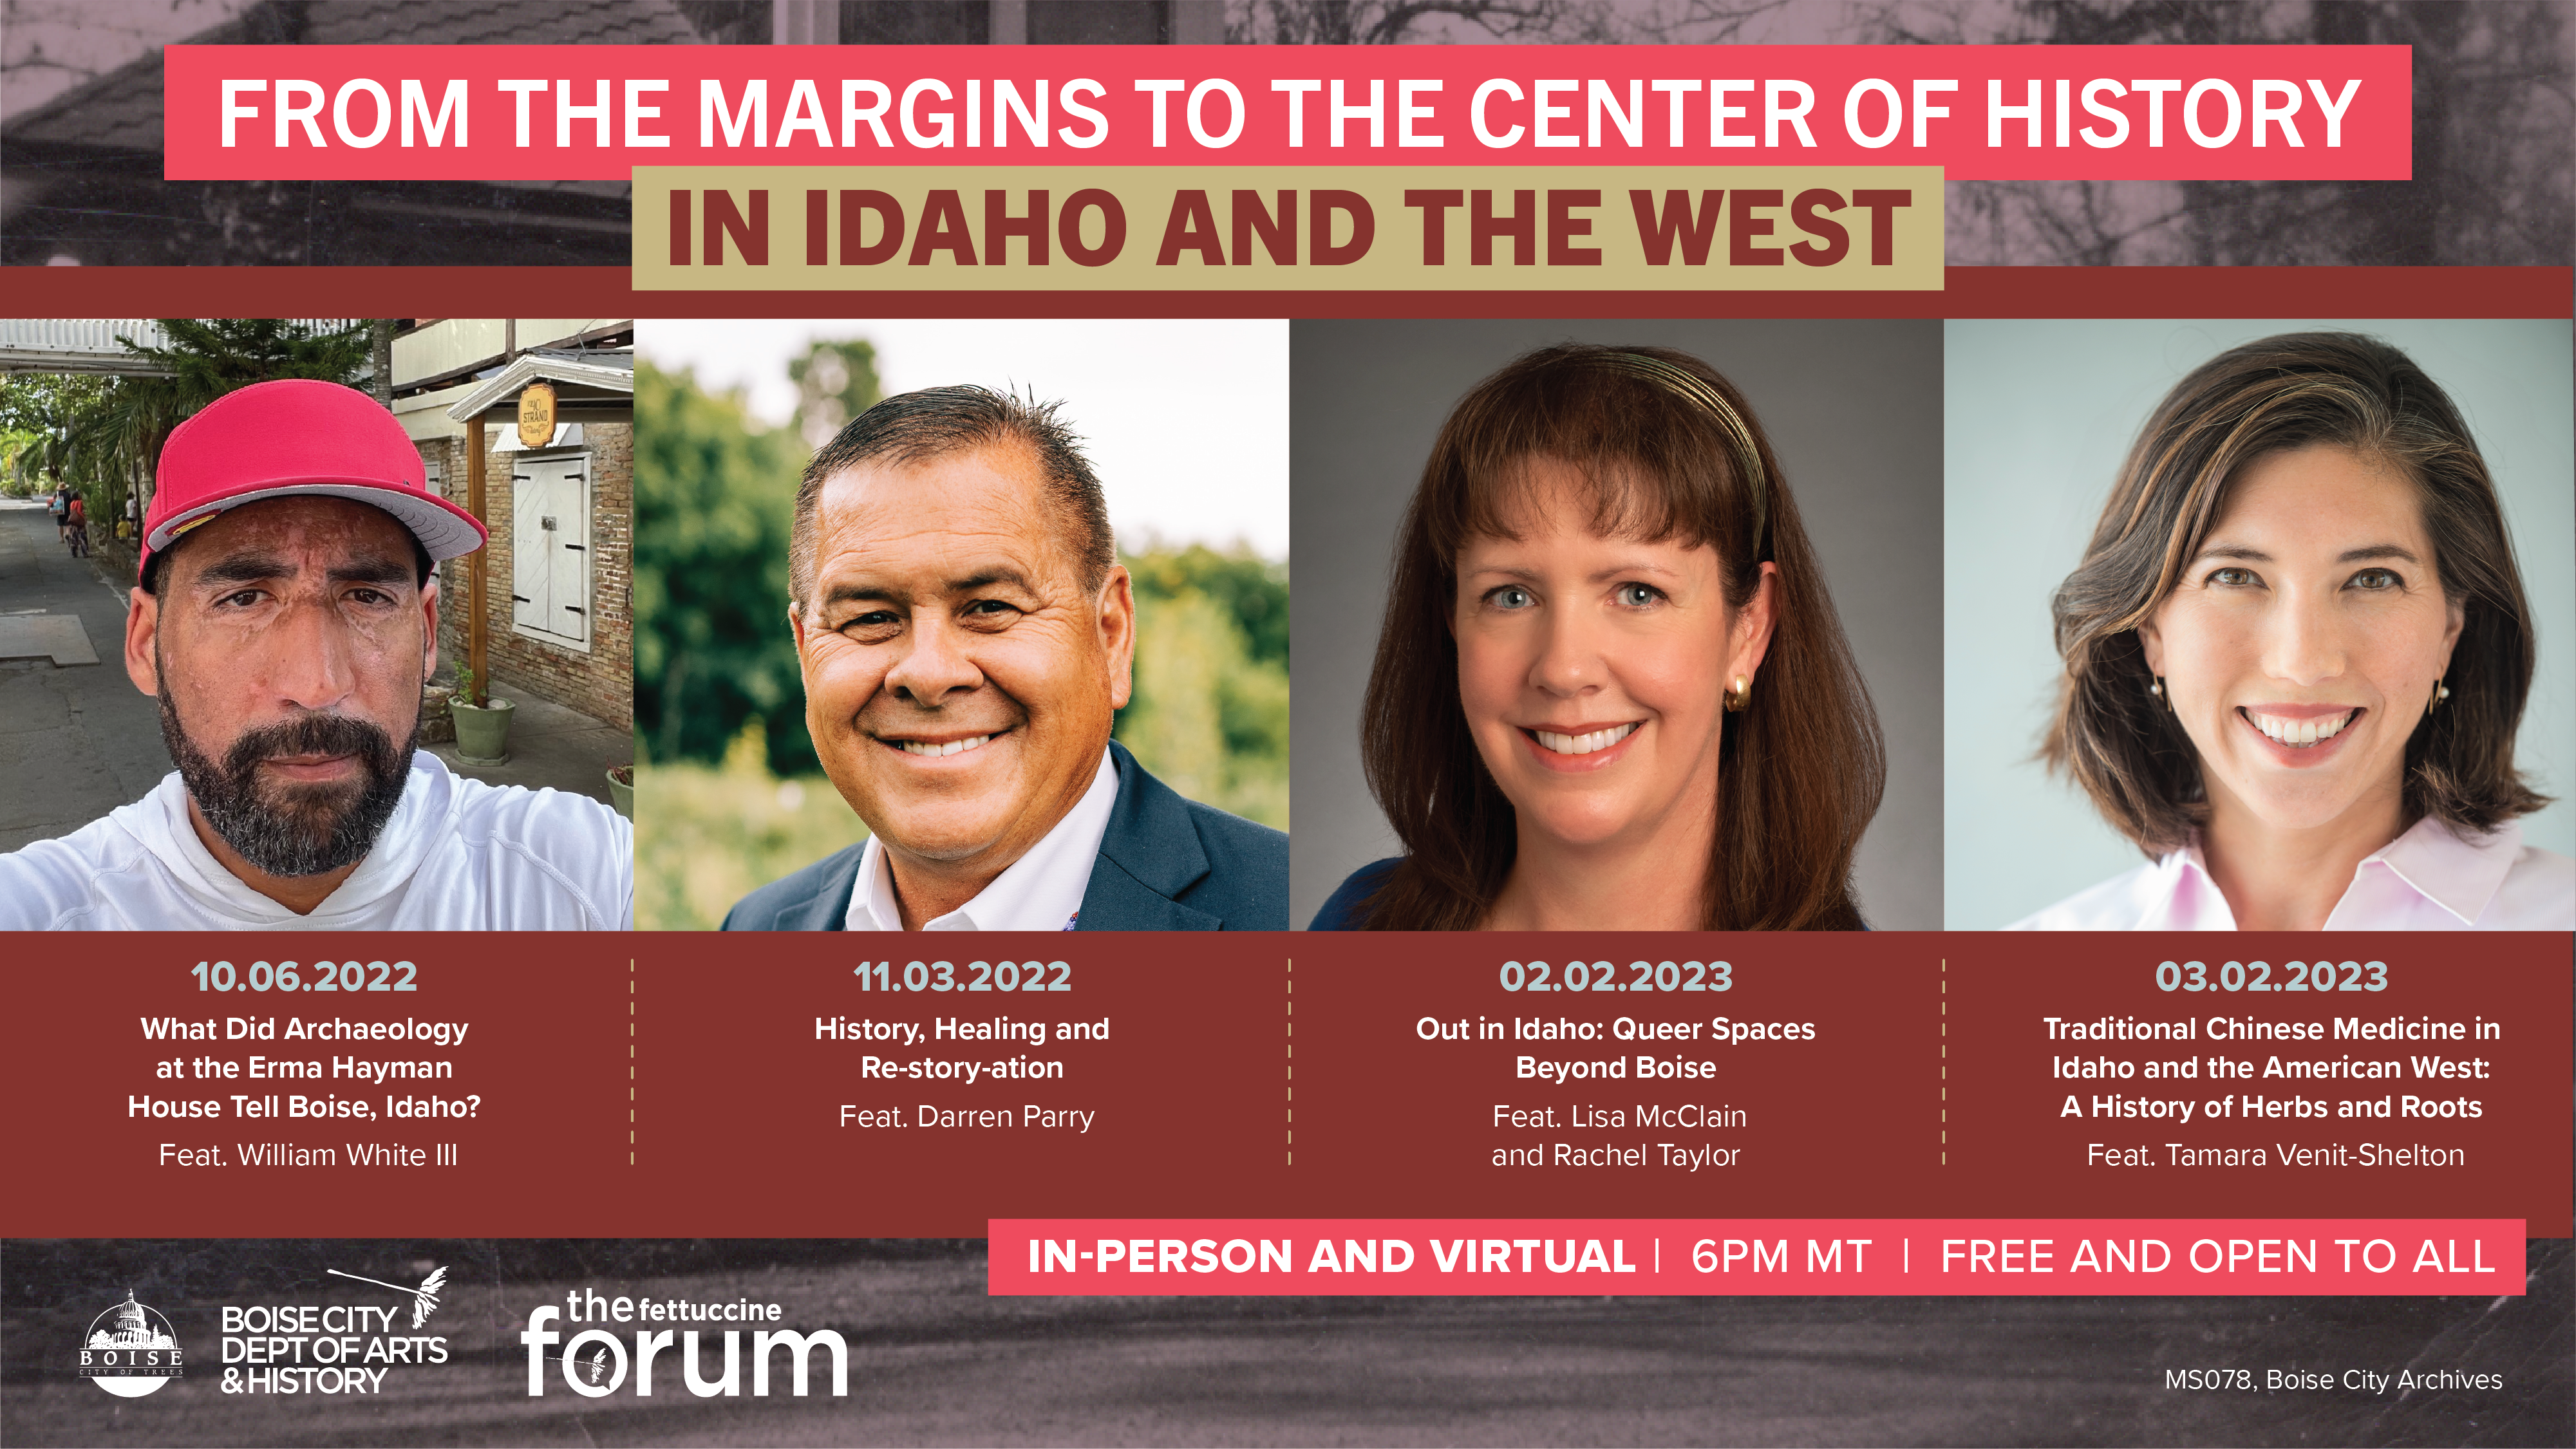 Banner image featuring four speaker headshots, William White III, Darren Parry, Lisa McLain, and Tamara Venit-Shelton, who will offer perspectives on Black, Indigenous, LGBTQ+, and Asian American histories, activism, and community building in Idaho and the West. The events are held in-person and virtually on 10/6, 11/3, and 2/2, and 3/2 at 6 p.m.